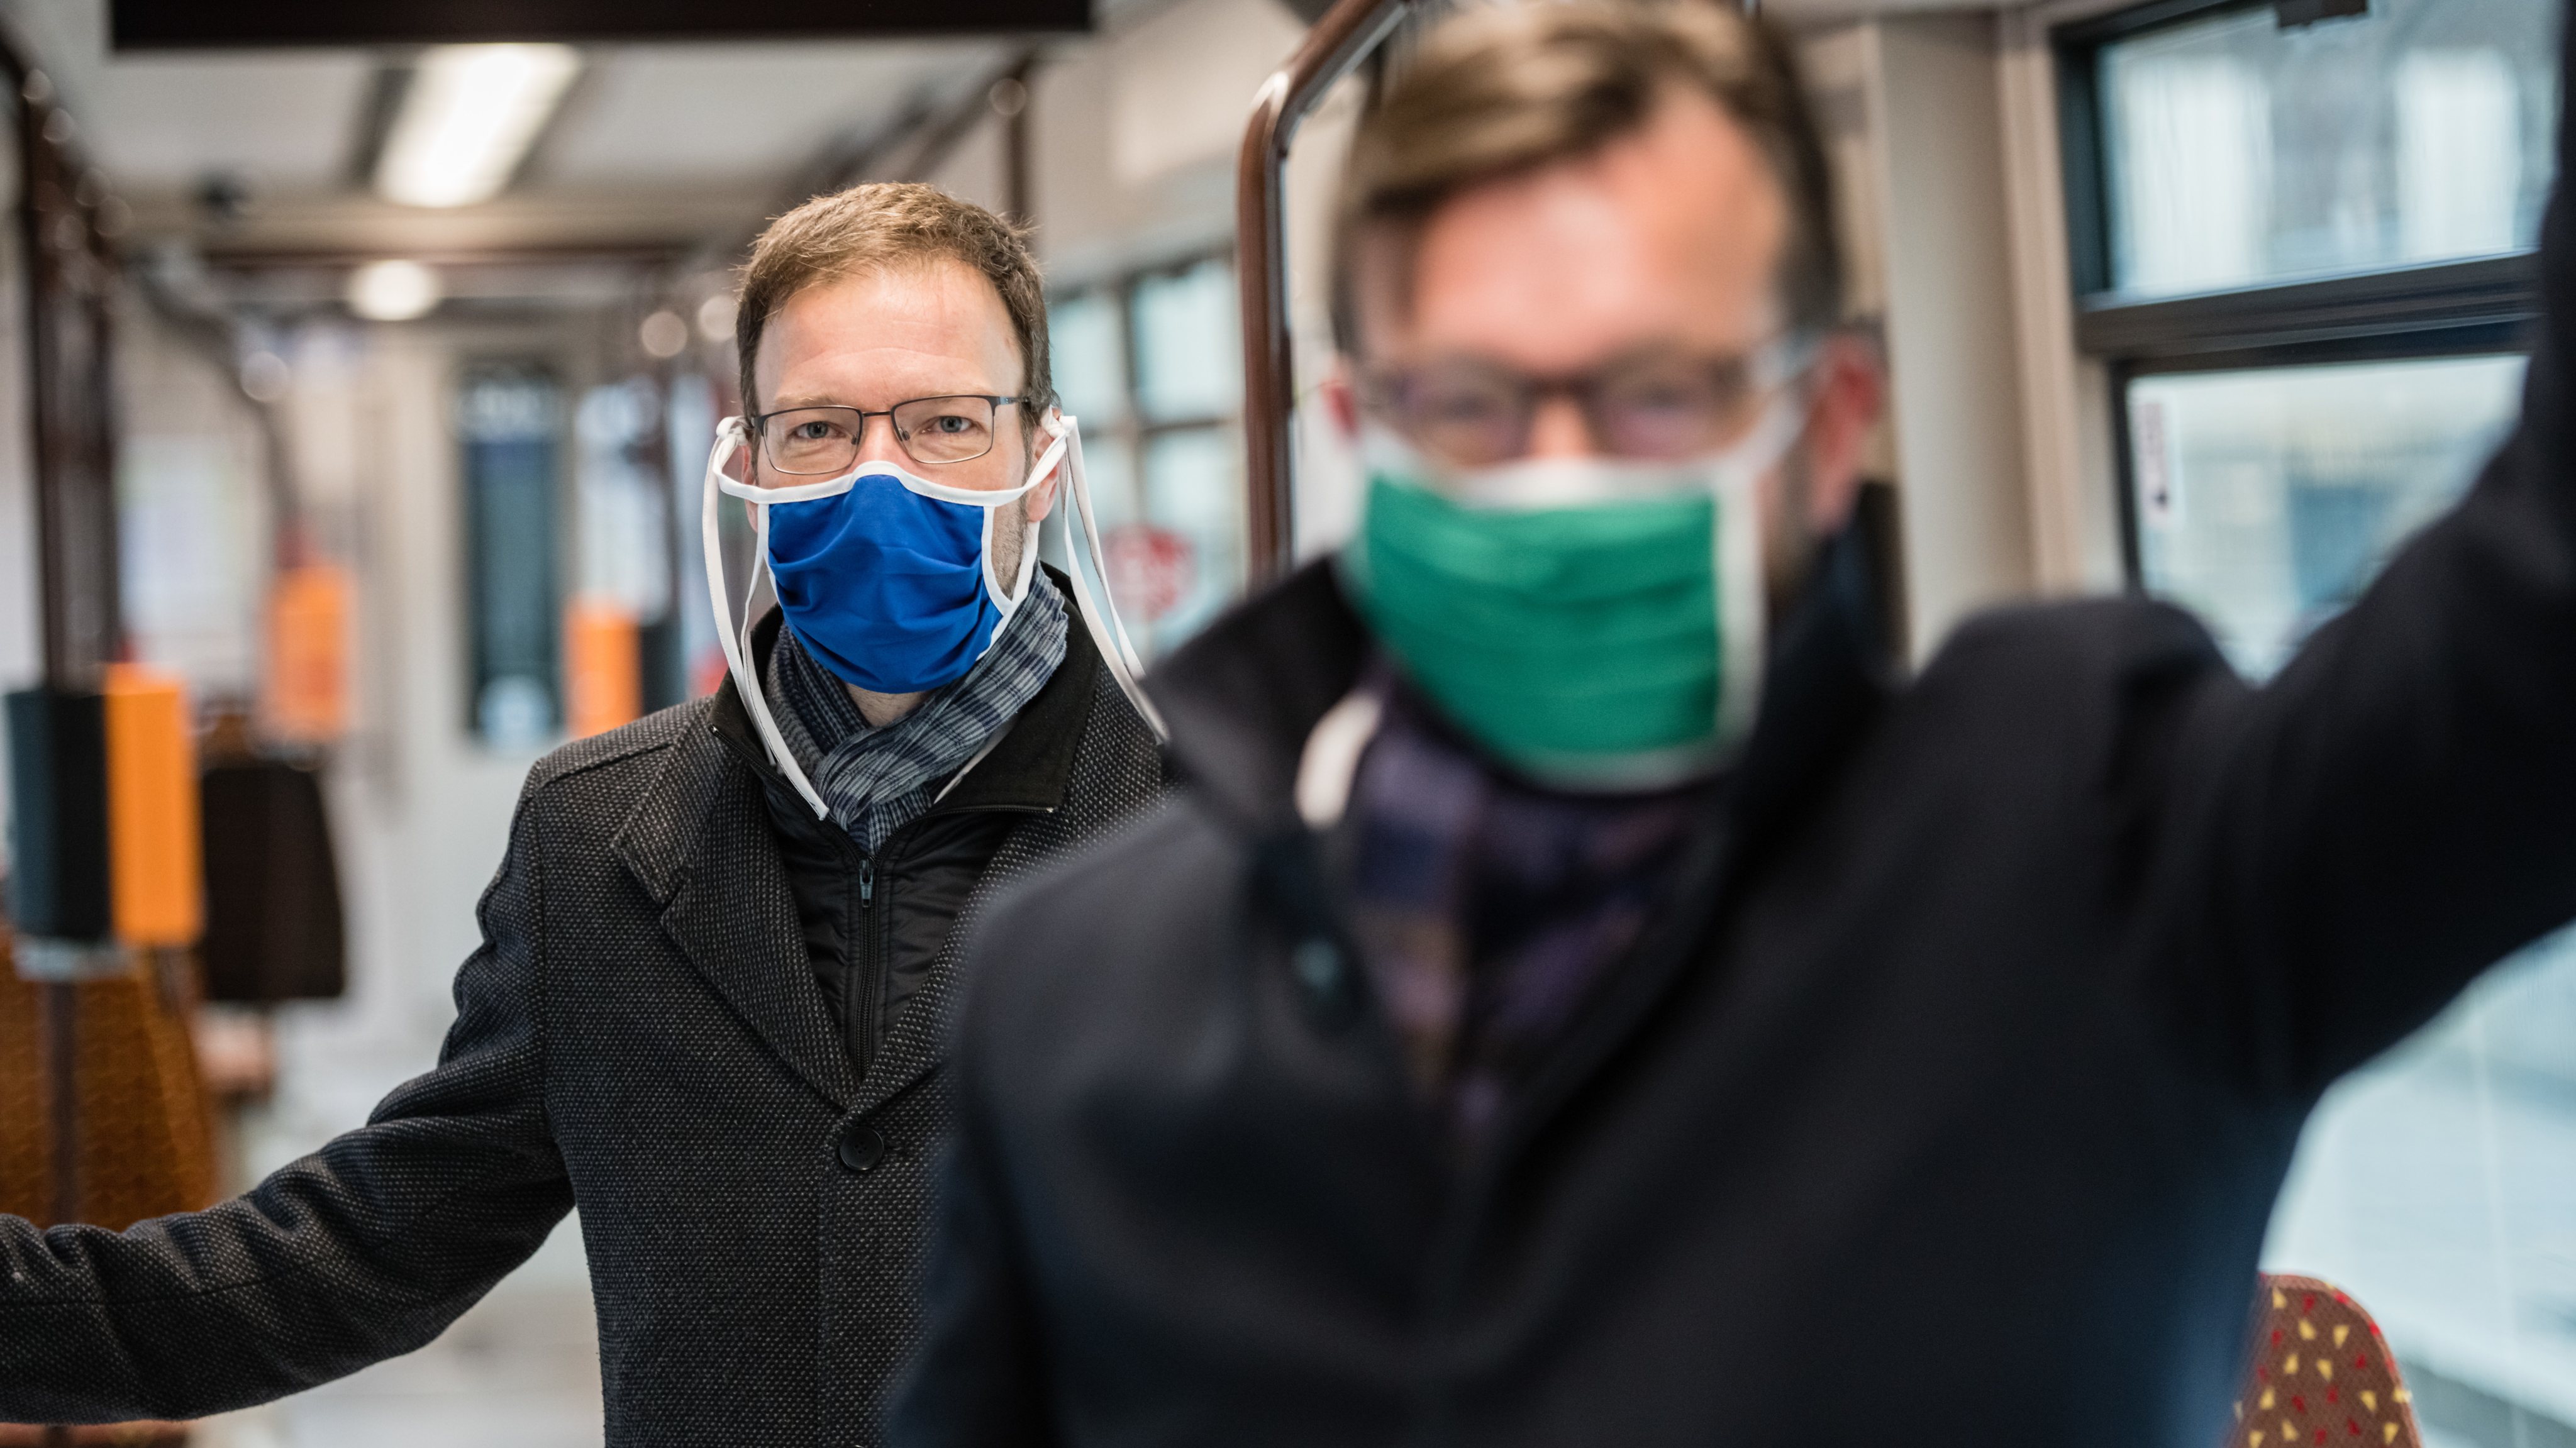 Jena To Introduces Face Mask Requirement During Coronavirus Crisis